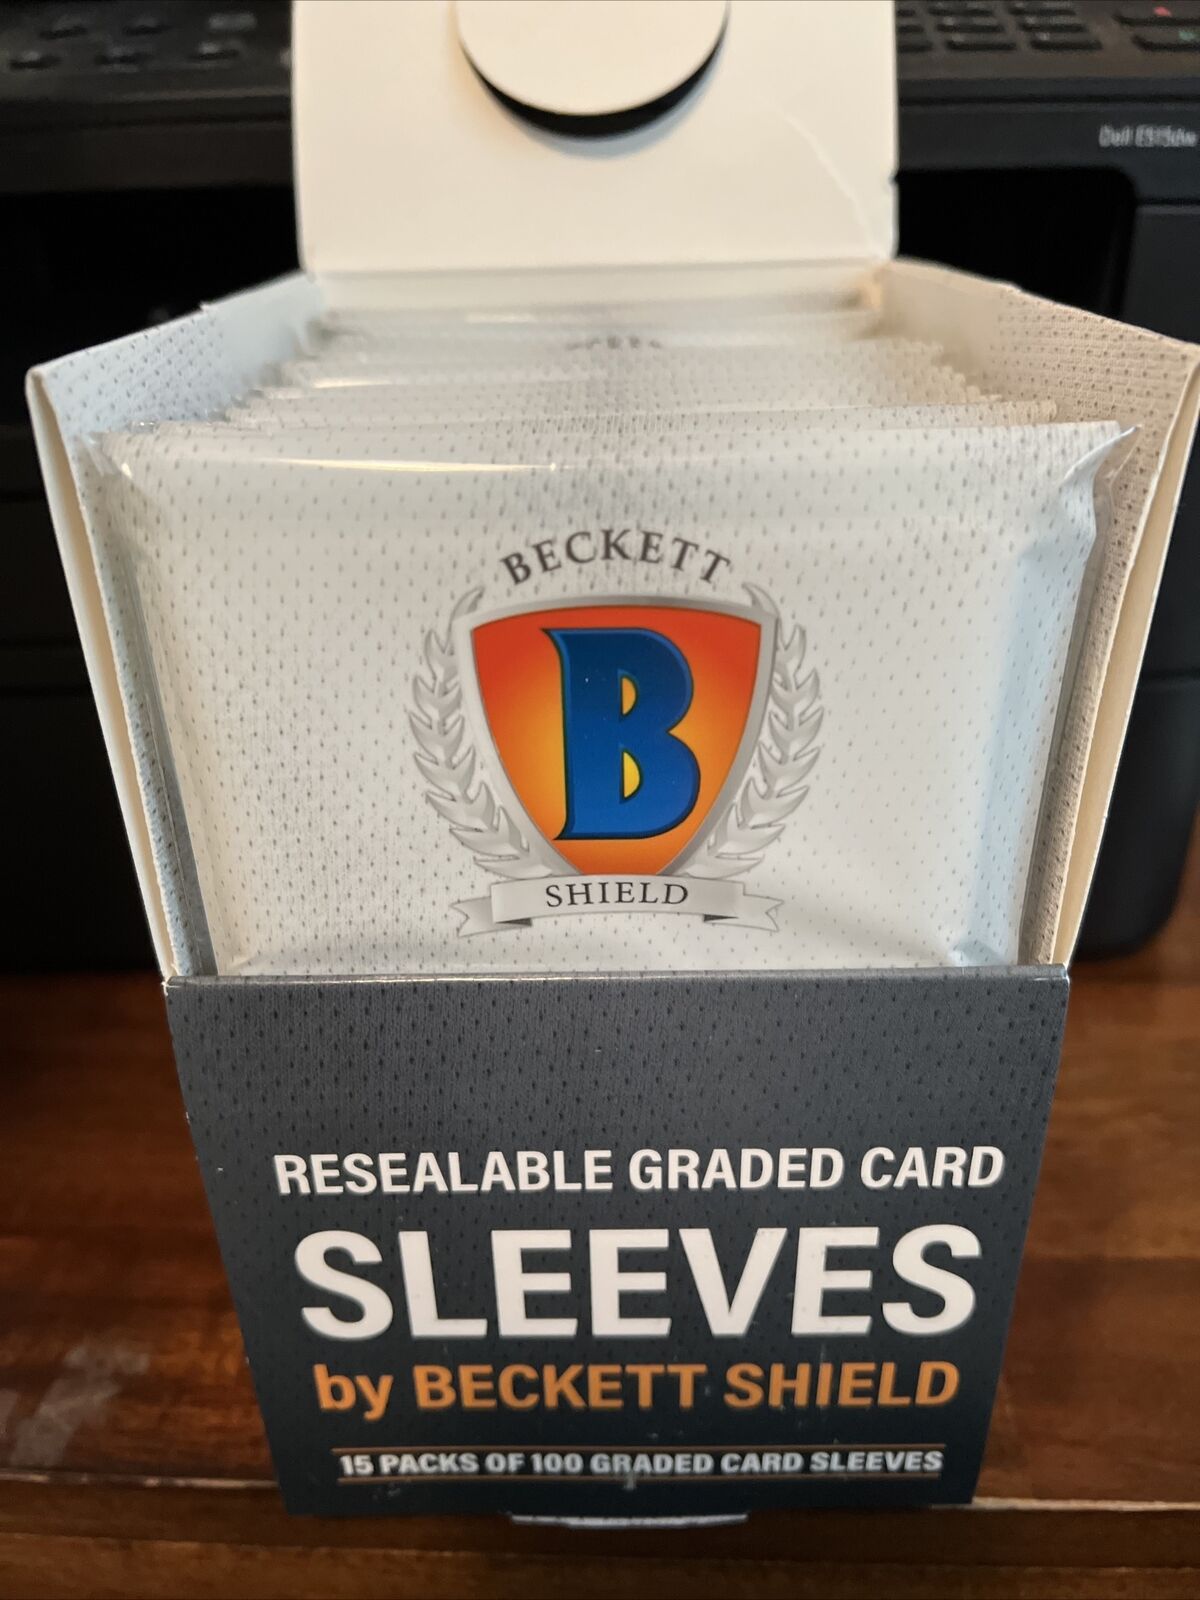 Beckett Shield Resealable Graded Card Sleeves 15 Packs of 100 - 1500 Total